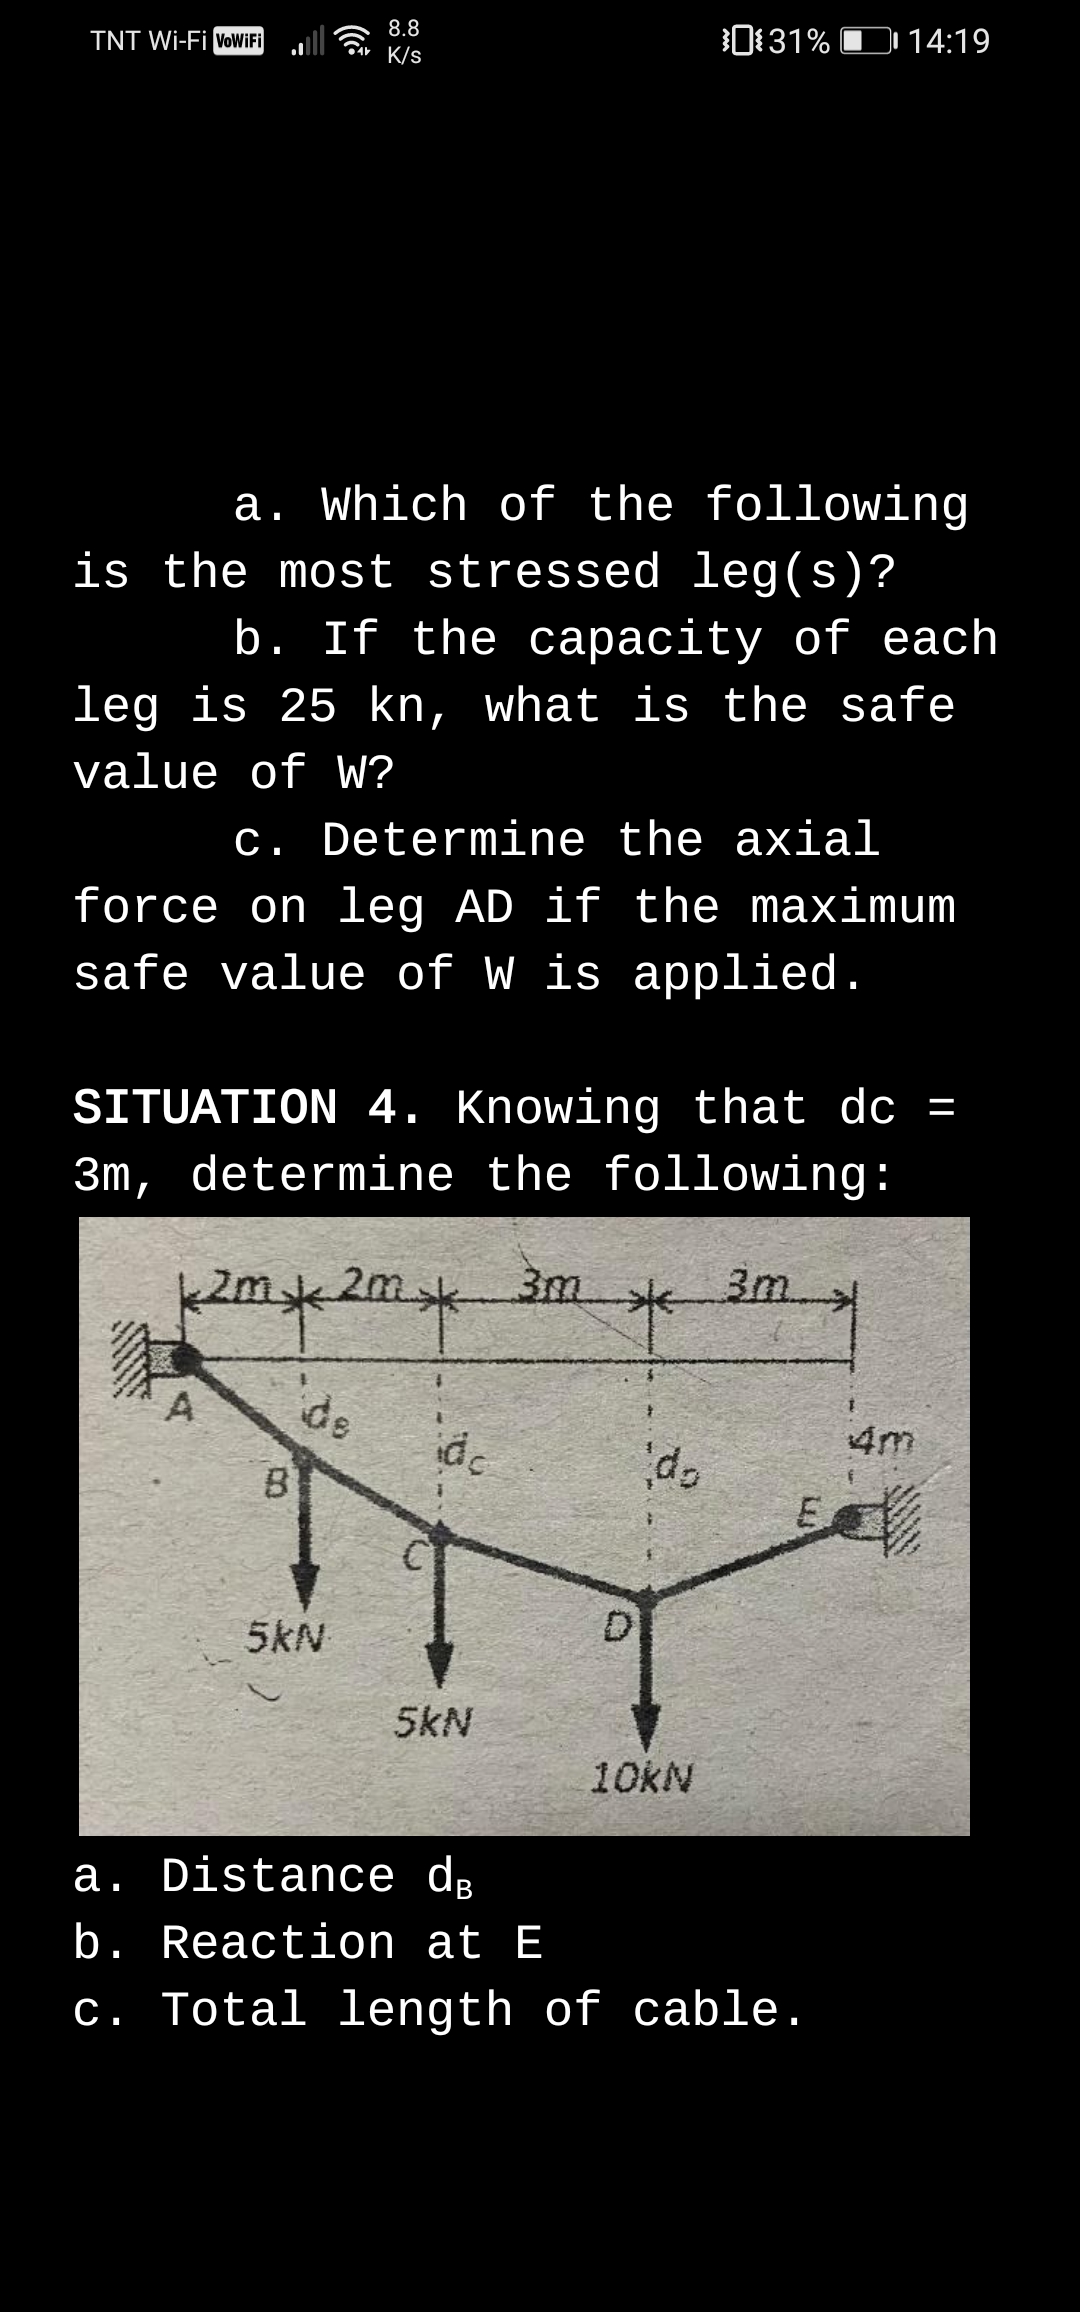 0131% D 14:19
8.8
TNT Wi-Fi voWiFi
•4* K/s
a. Which of the following
is the most stressed leg(s)?
b. If the capacity of each
leg is 25 kn, what is the safe
value of W?
c. Determine the axial
force on leg AD if the maximum
safe value of W is applied.
SITUATION 4. Knowing that do =
3m, determine the following:
2m,
3m
3m
de
id
4m
B
DI
5kN
5kN
10KN
a. Distance dɛ
b. Reaction at E
c. Total length of cable.
